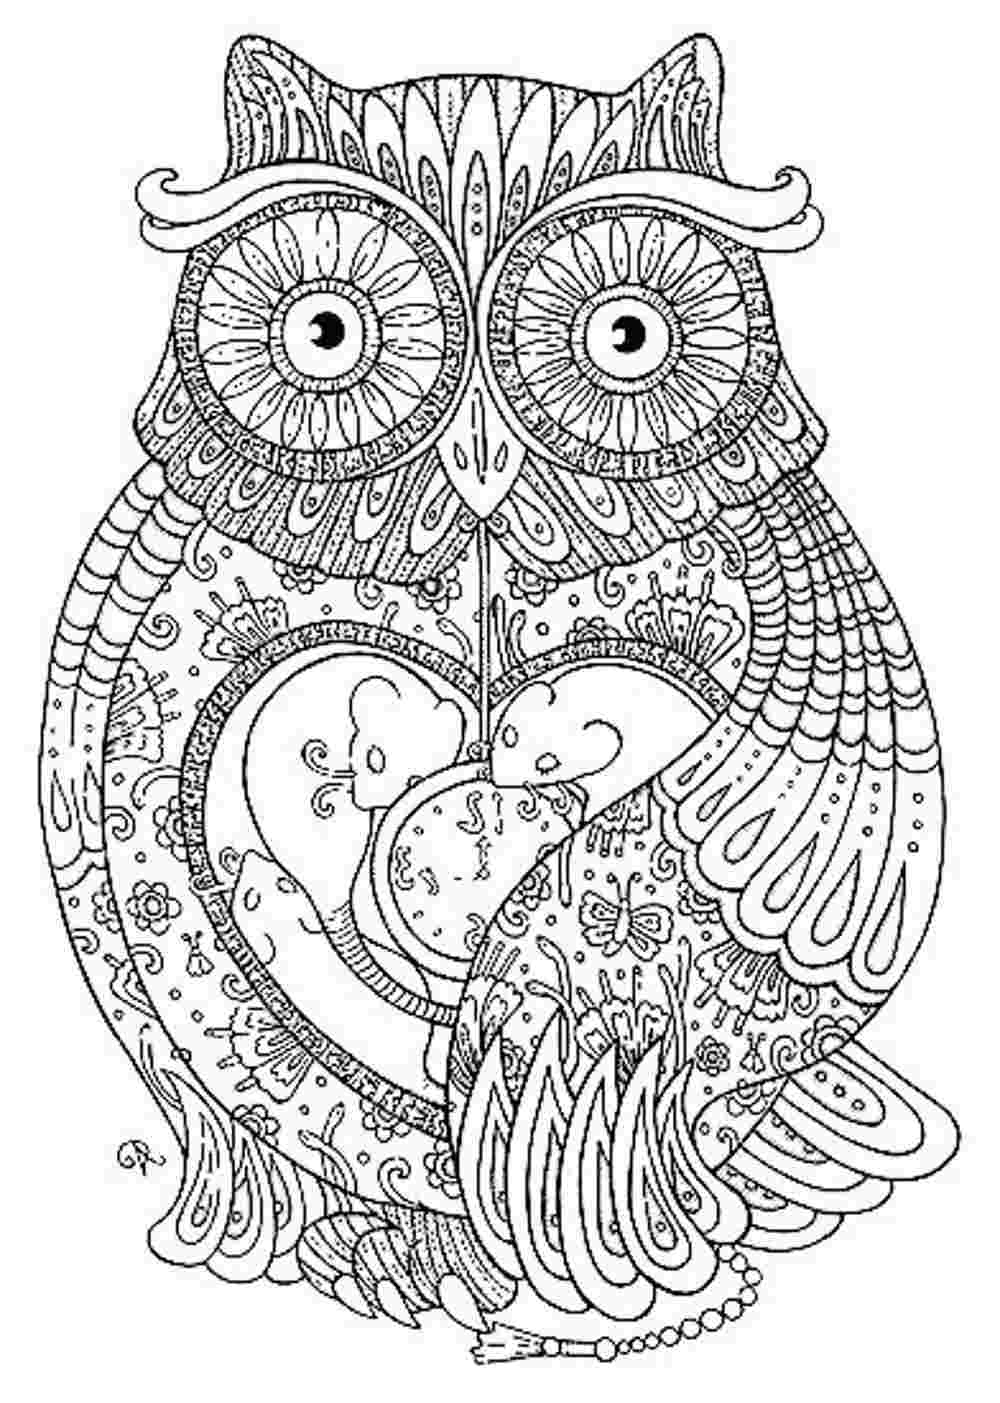 Free Abstract Animal Coloring Pages, Download Free Abstract Animal ...